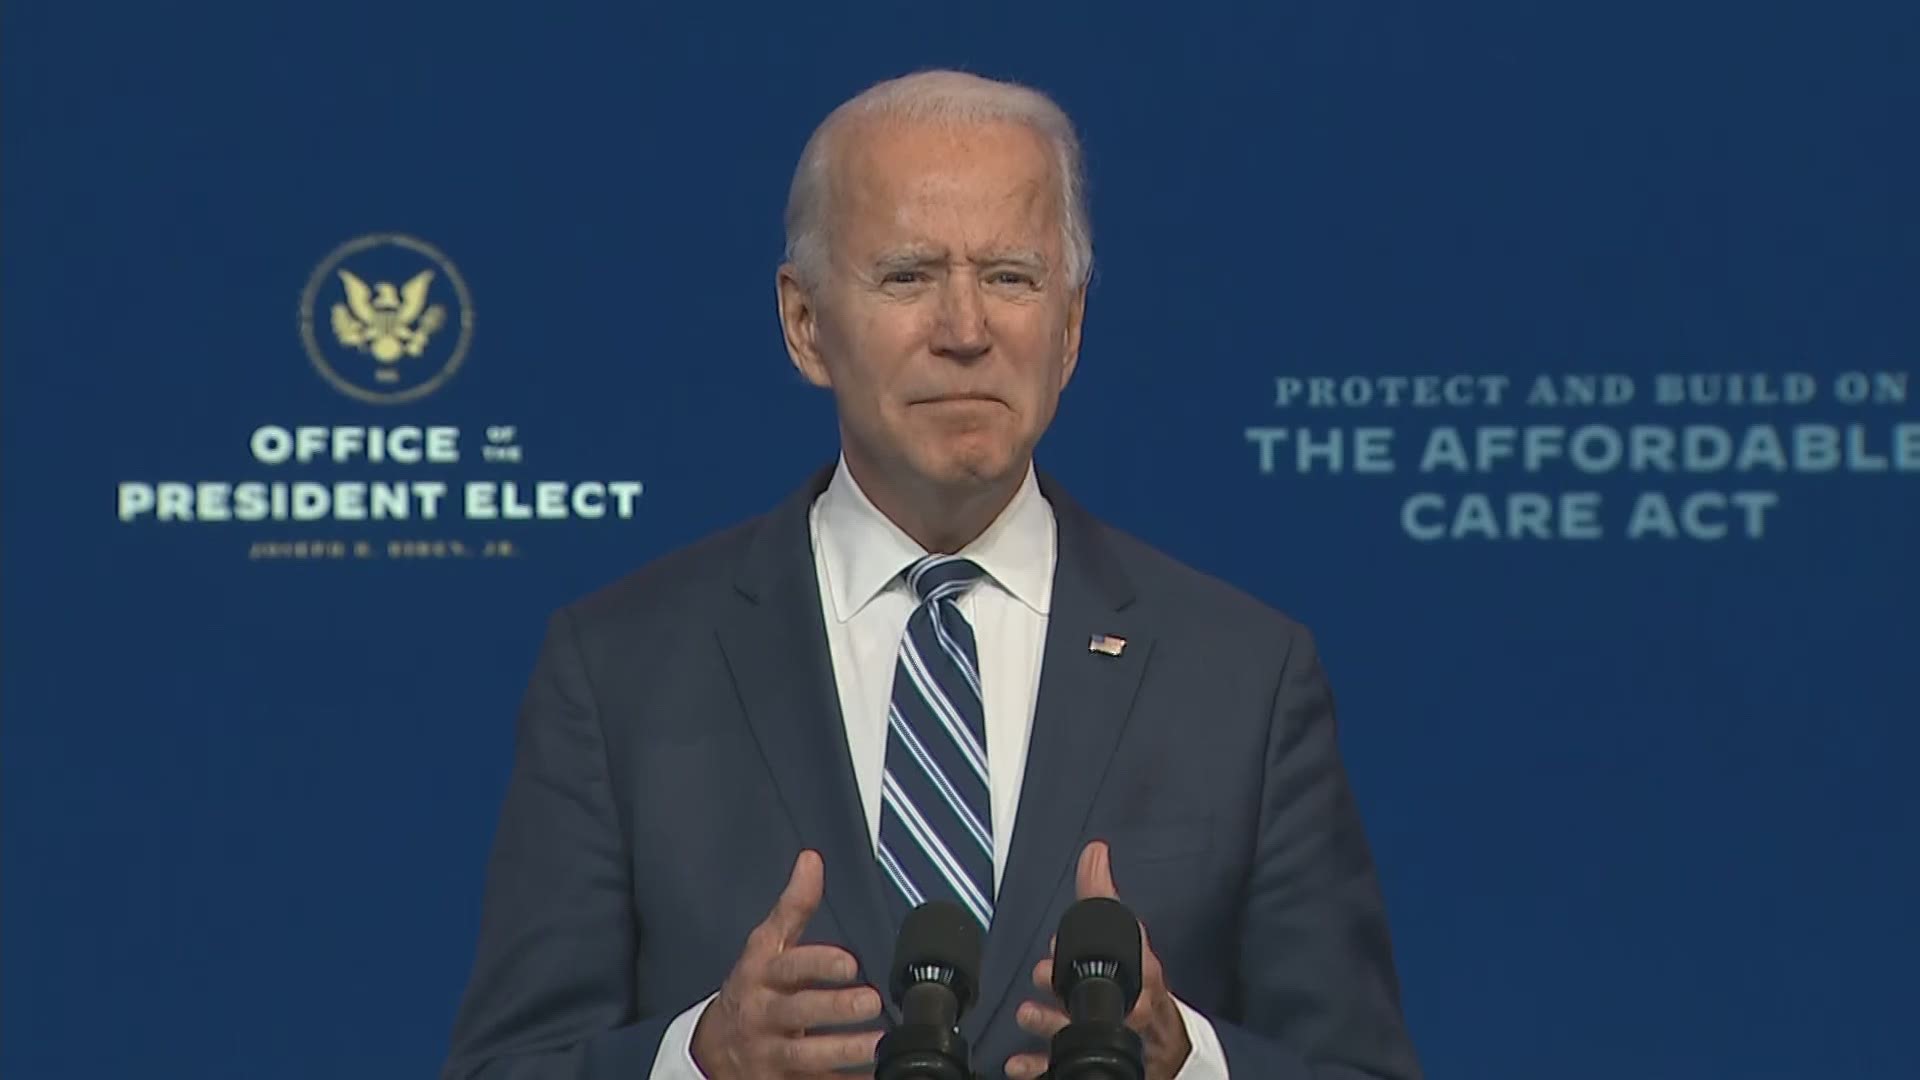 President-elect Joe Biden said Tuesday his administration will fight for Americans' health coverage the same way they'd fight for their family's.